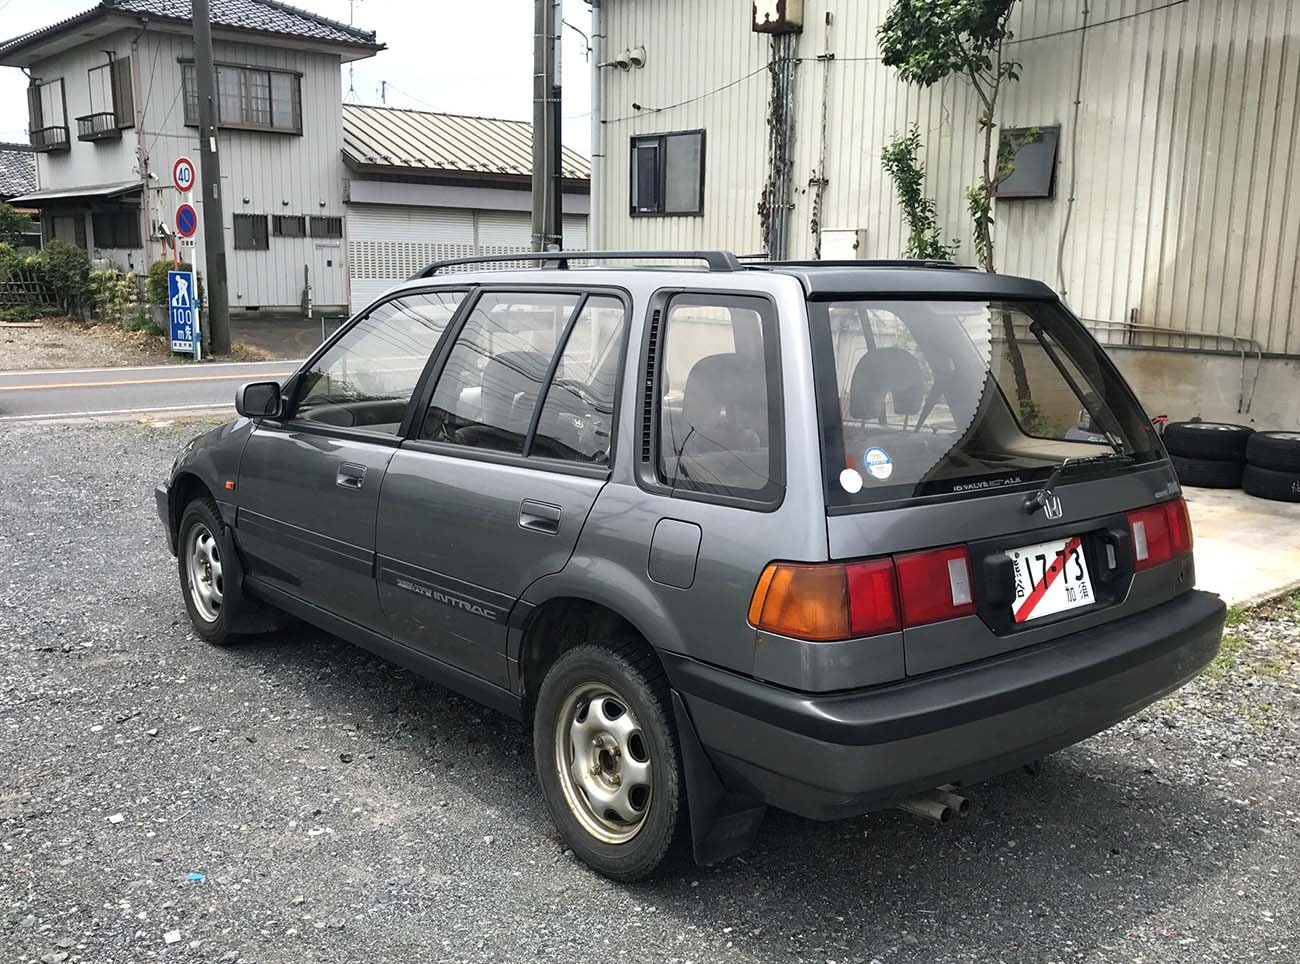 Civic shuttle. Honda Civic Shuttle 4wd. Honda Civic 4 Shuttle. Honda Civic Shuttle 1992. Honda Civic Shuttle 4wd 1985.